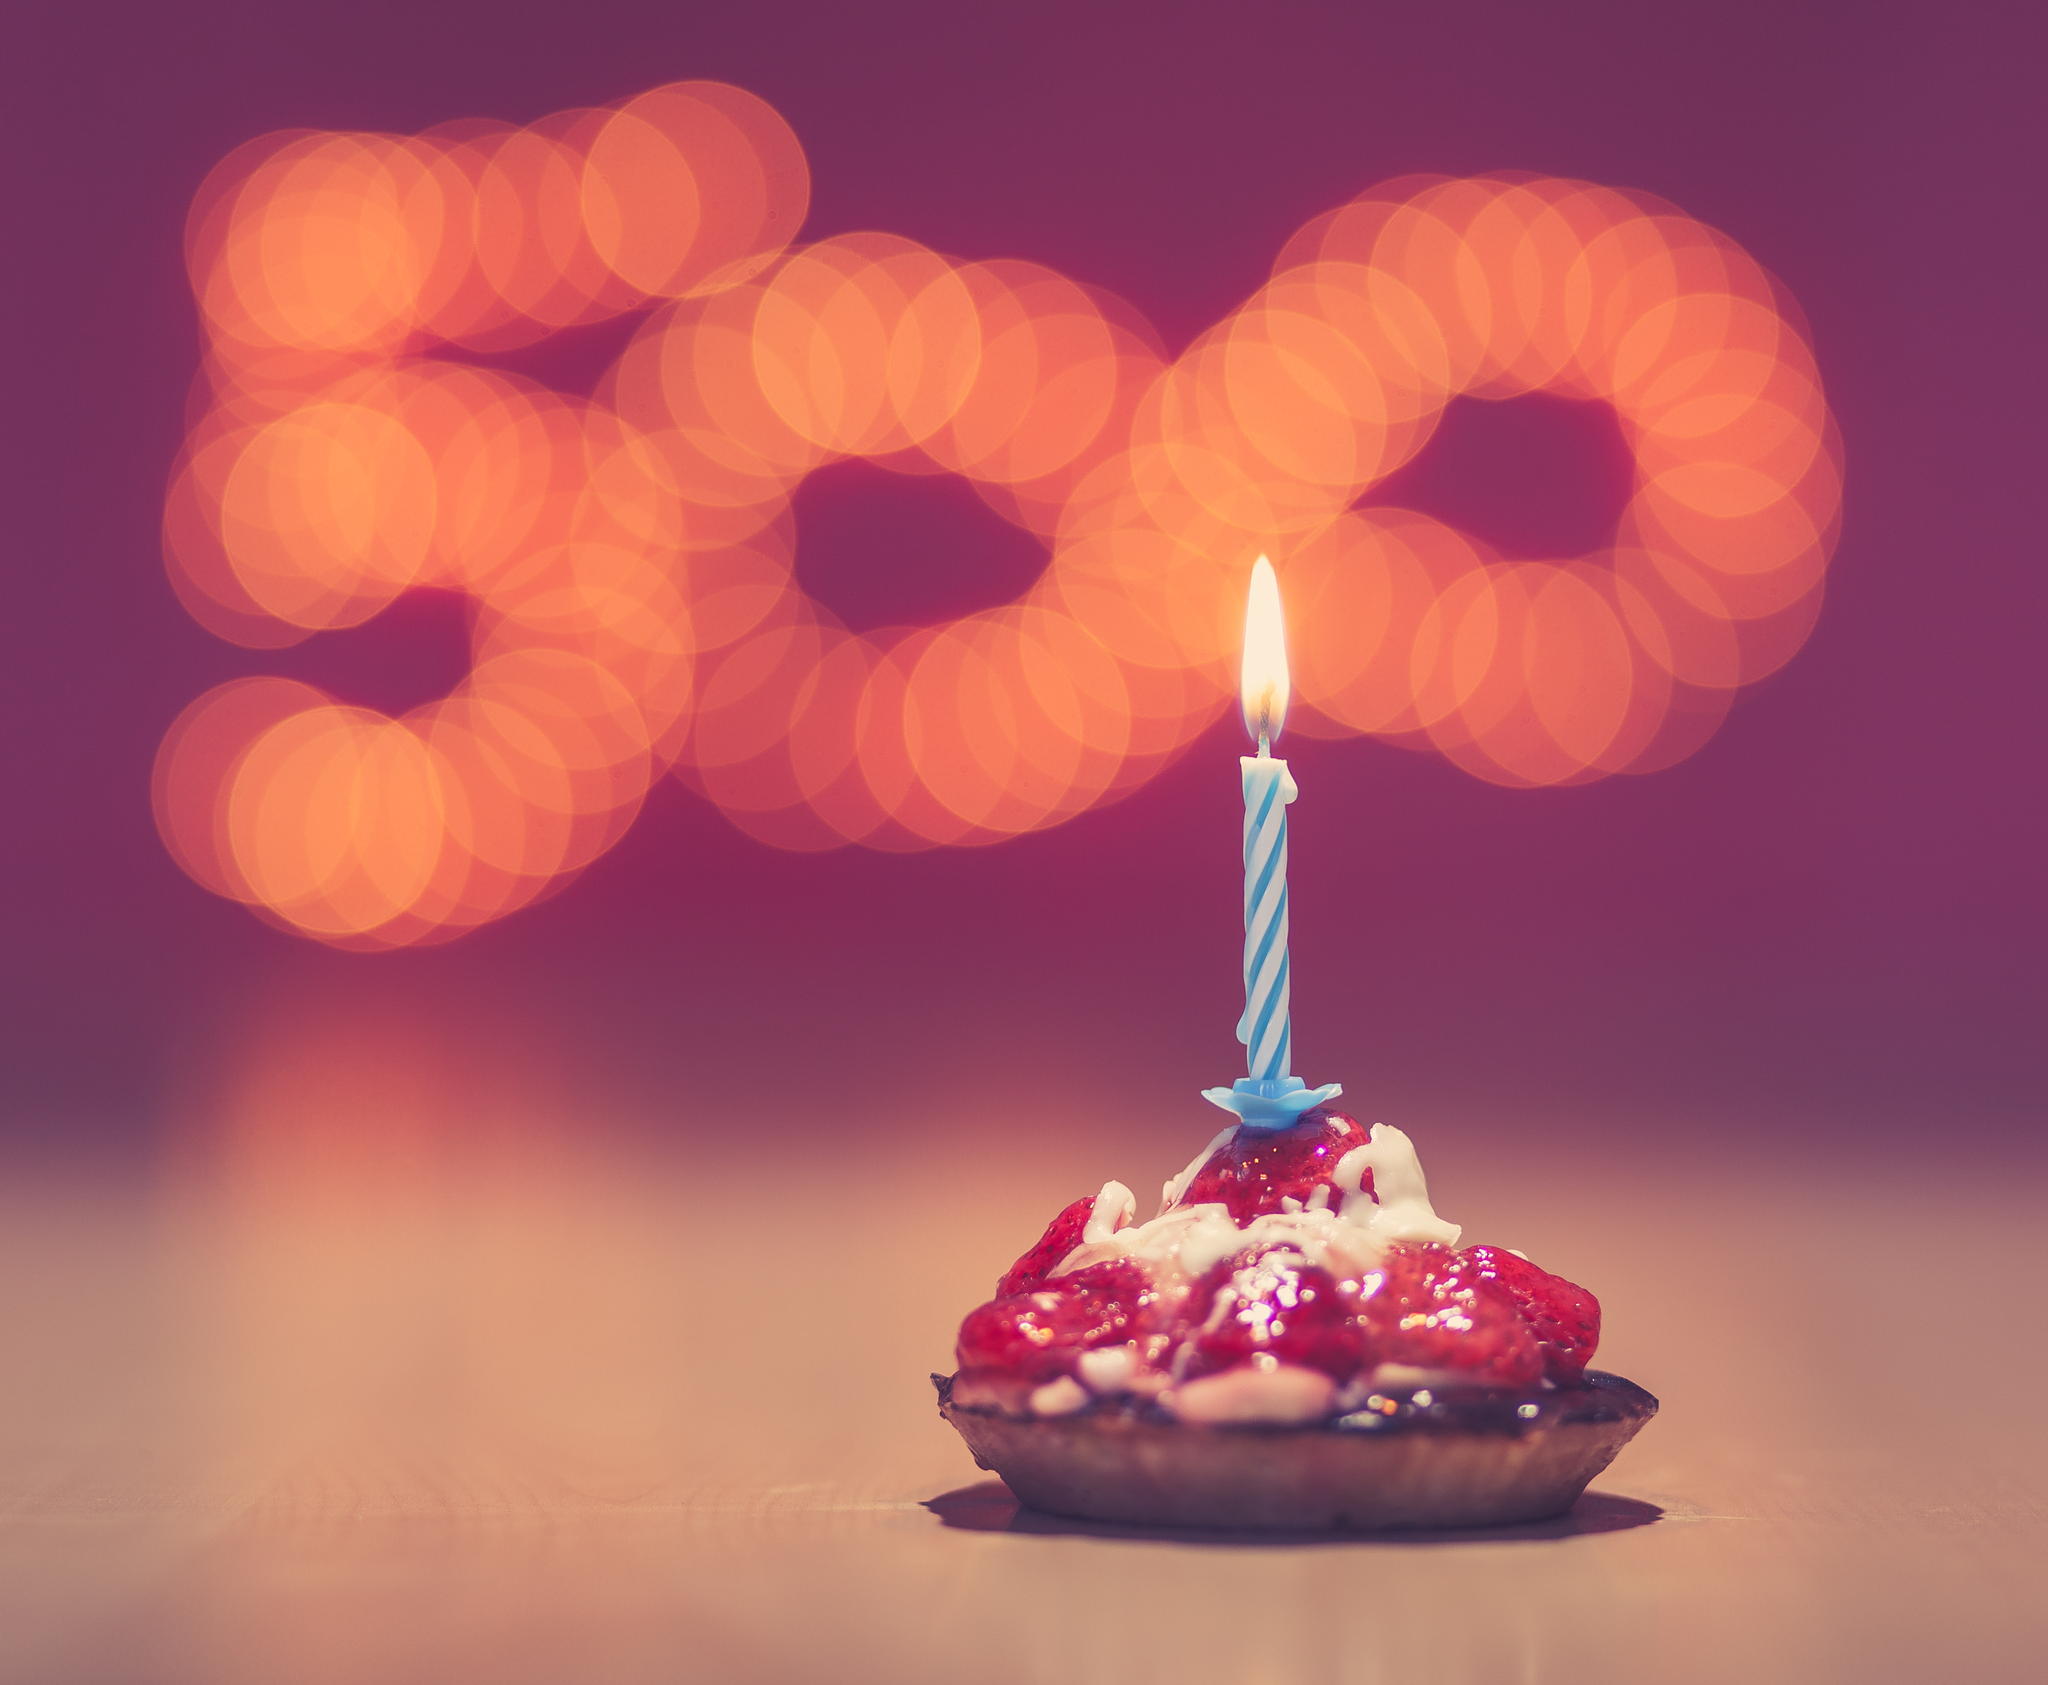 It's 500px's Birthday Month! Enter Our Contest & Win Epic Gifts